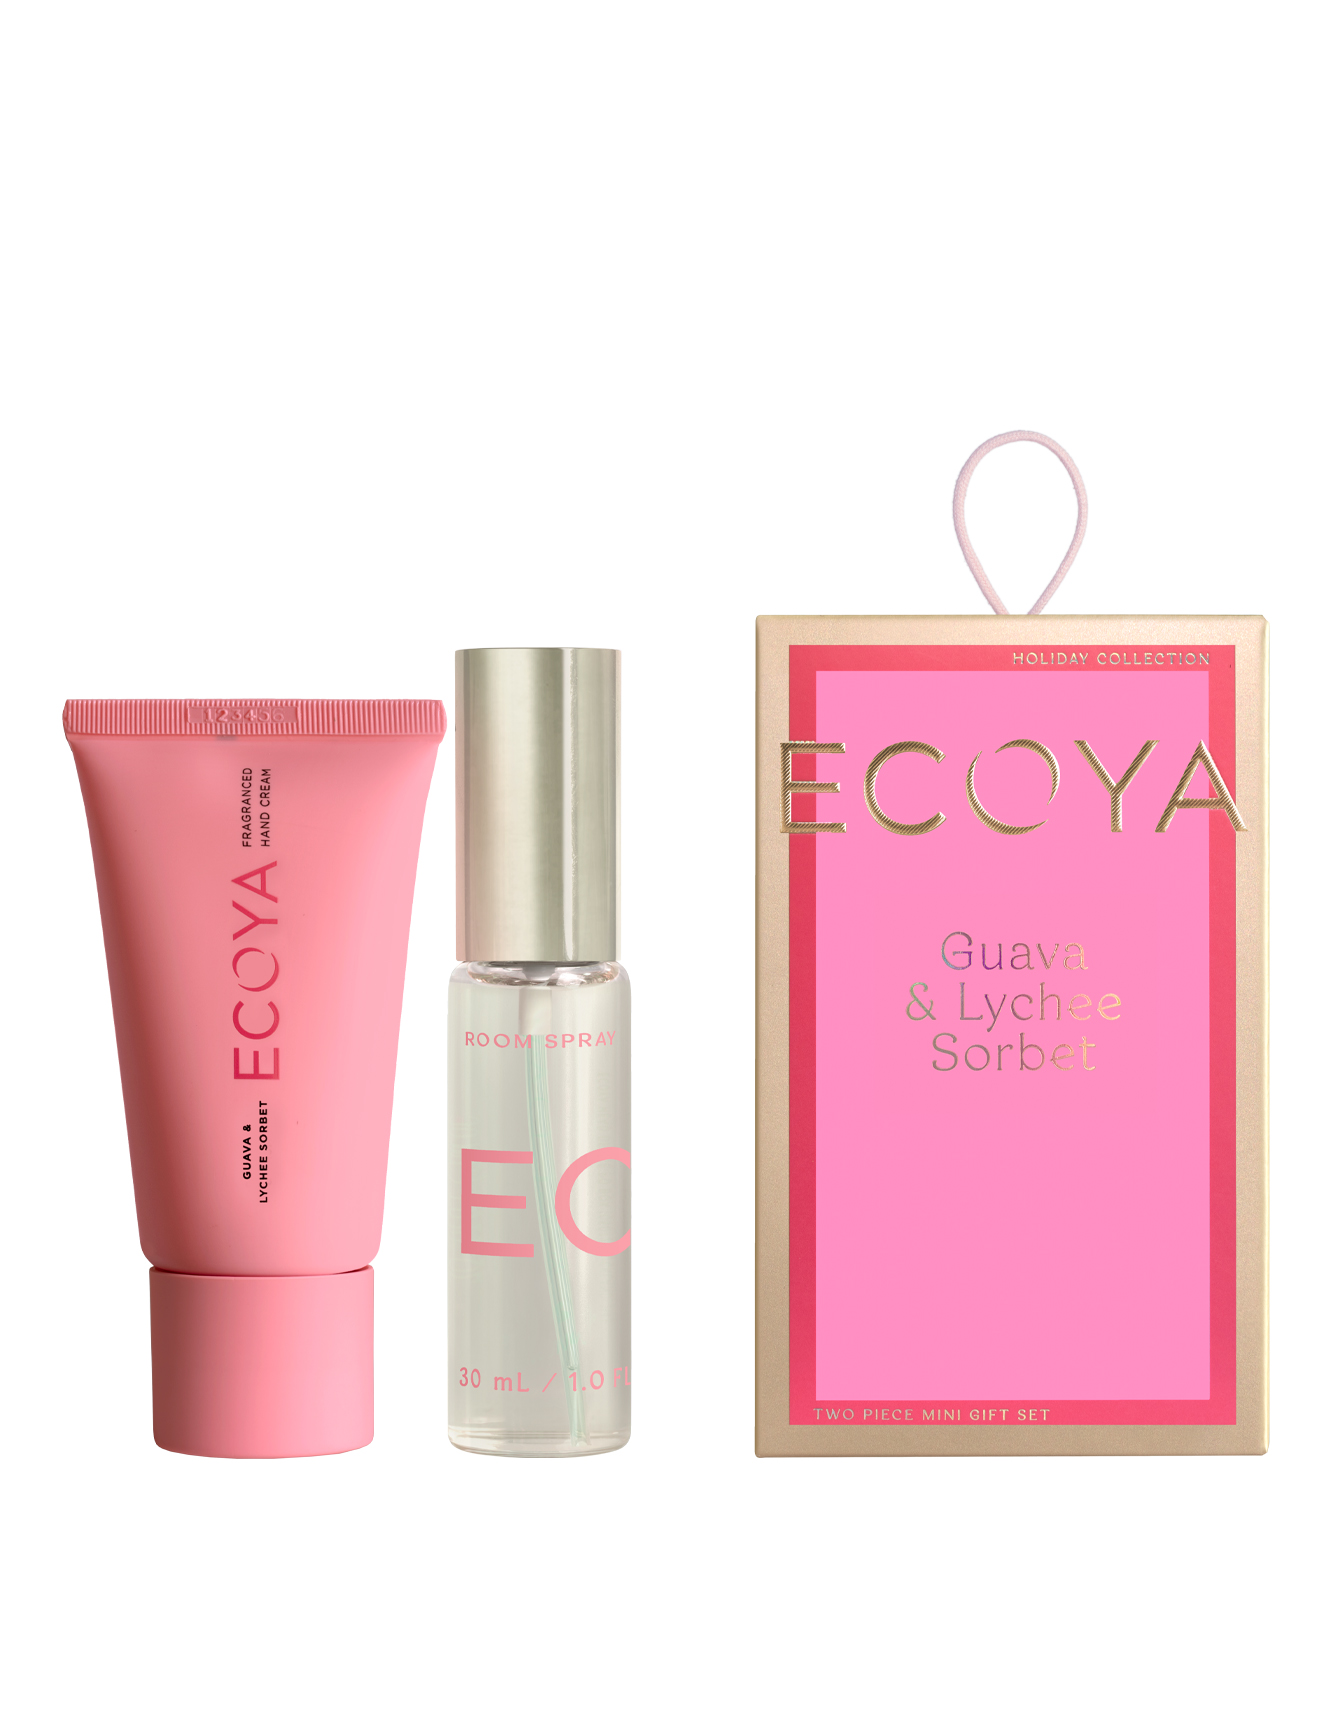 CMAS247 Two Piece Mini Gift Set - Guava & Lychee Sorbet